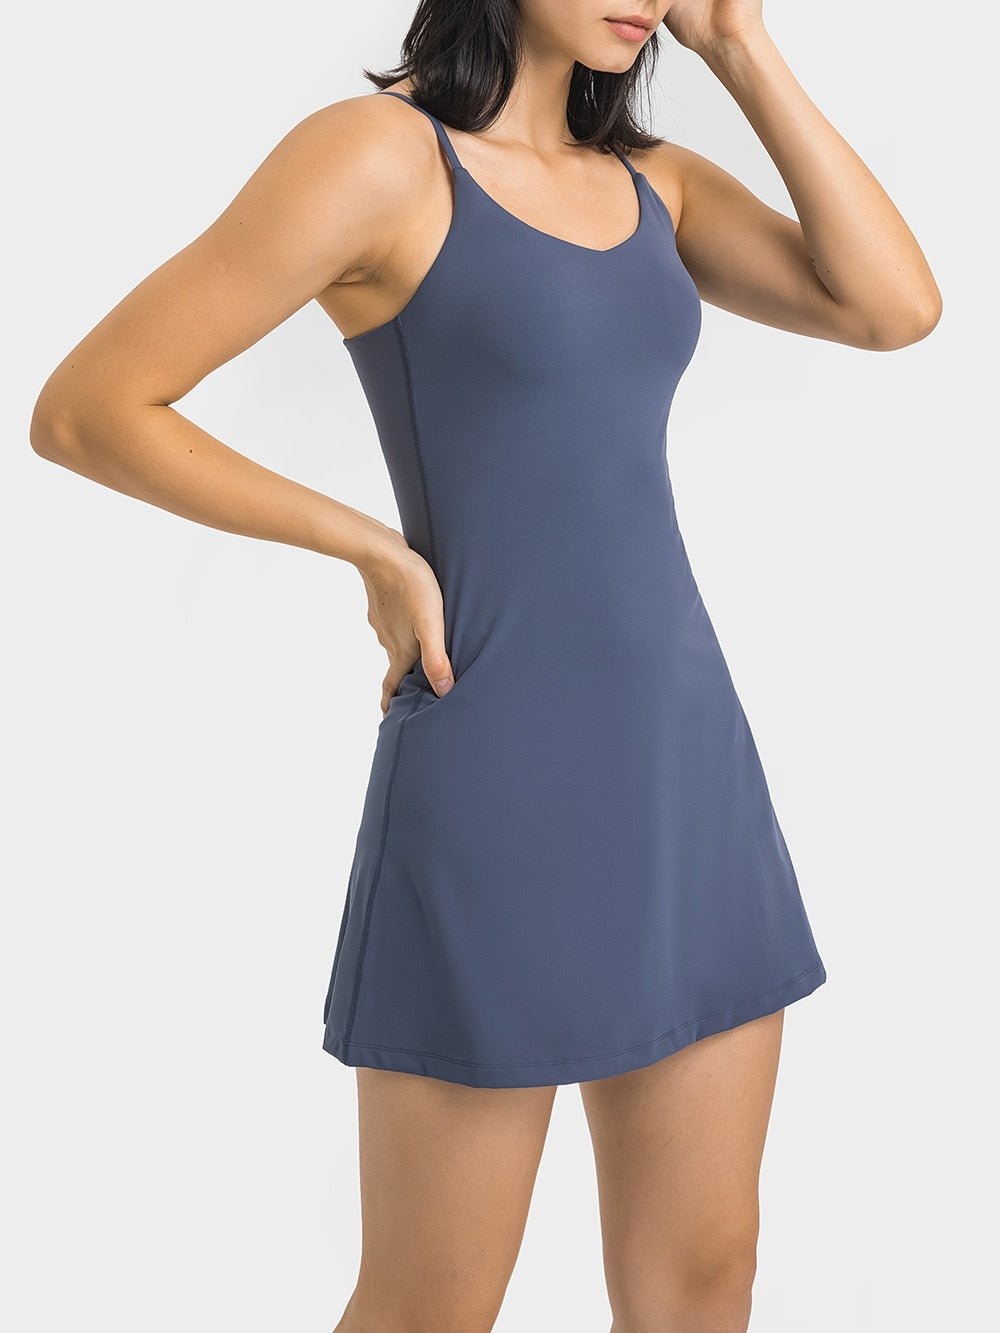 Women's Outfits Tennis Dress Built In Shorts And Bra Mini Dress